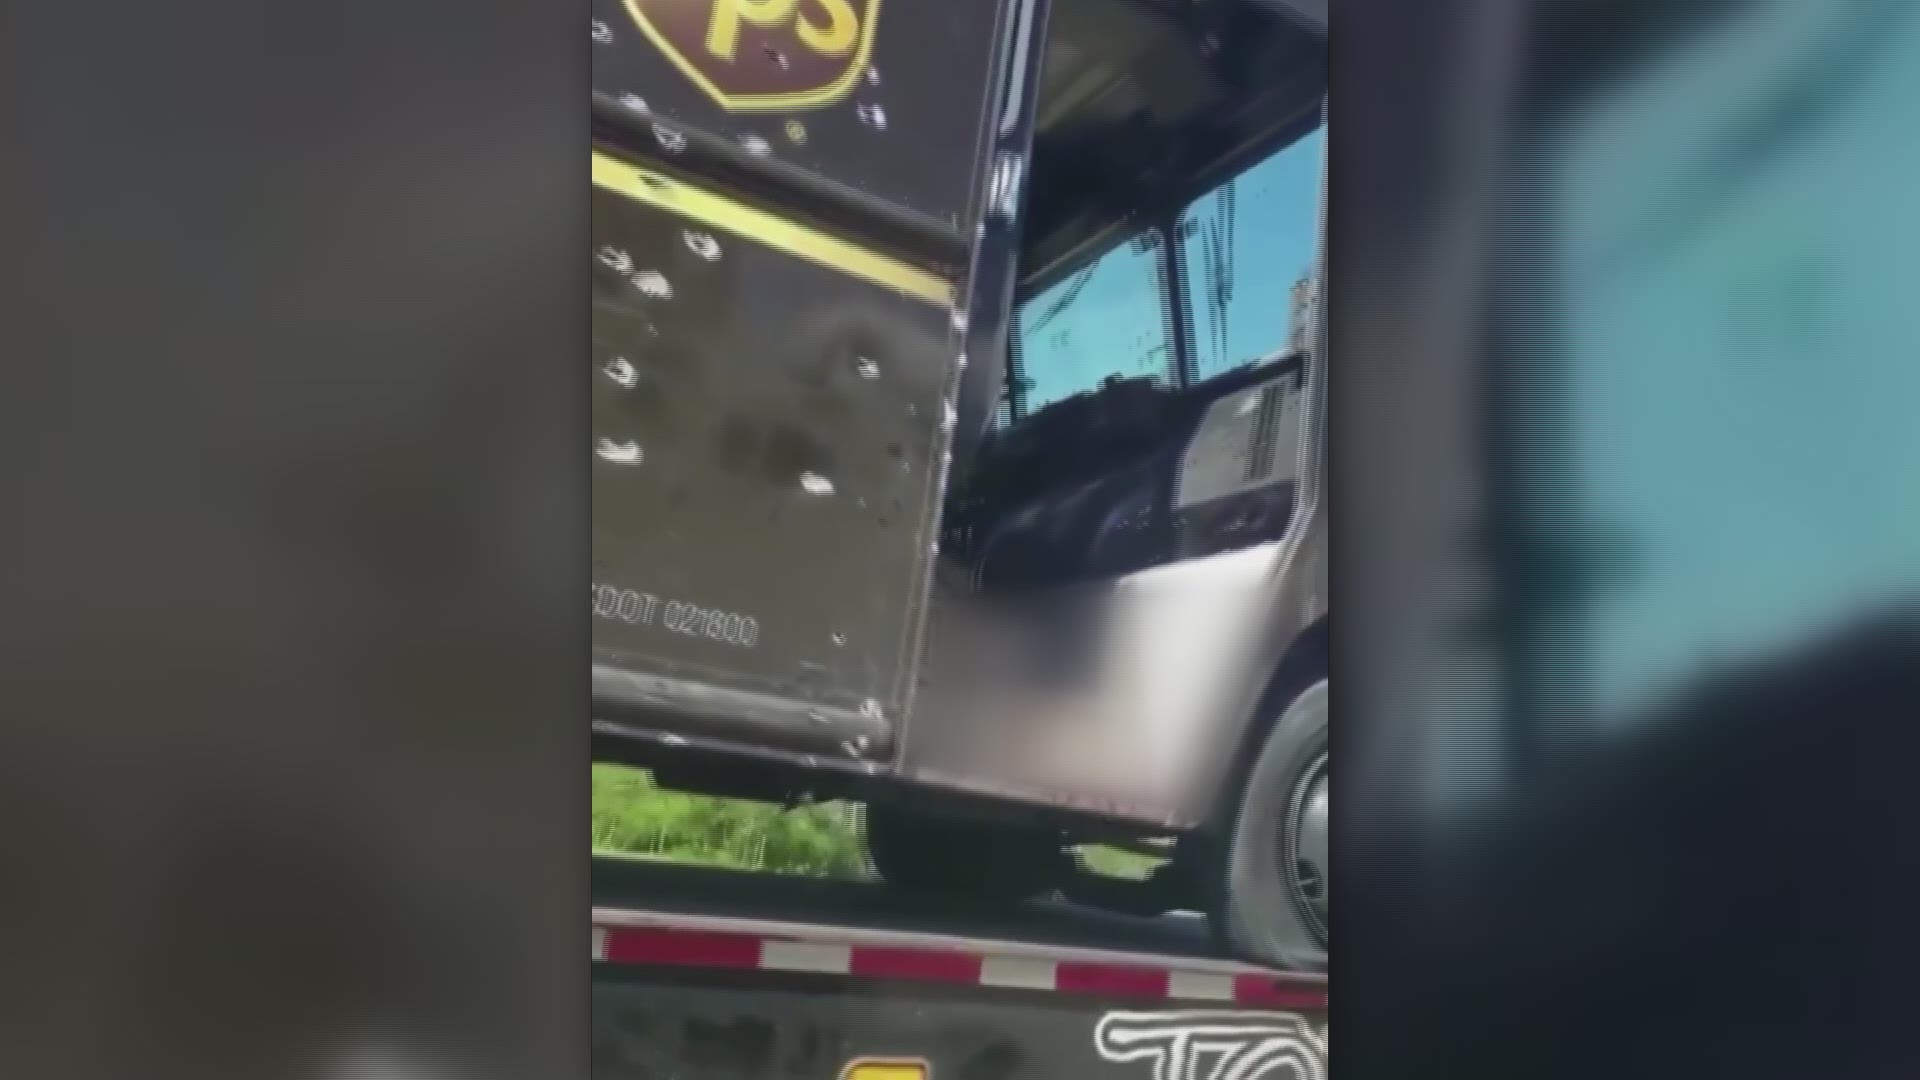 A First Coast News viewer shot video of the truck as it was being towed north on I-95.